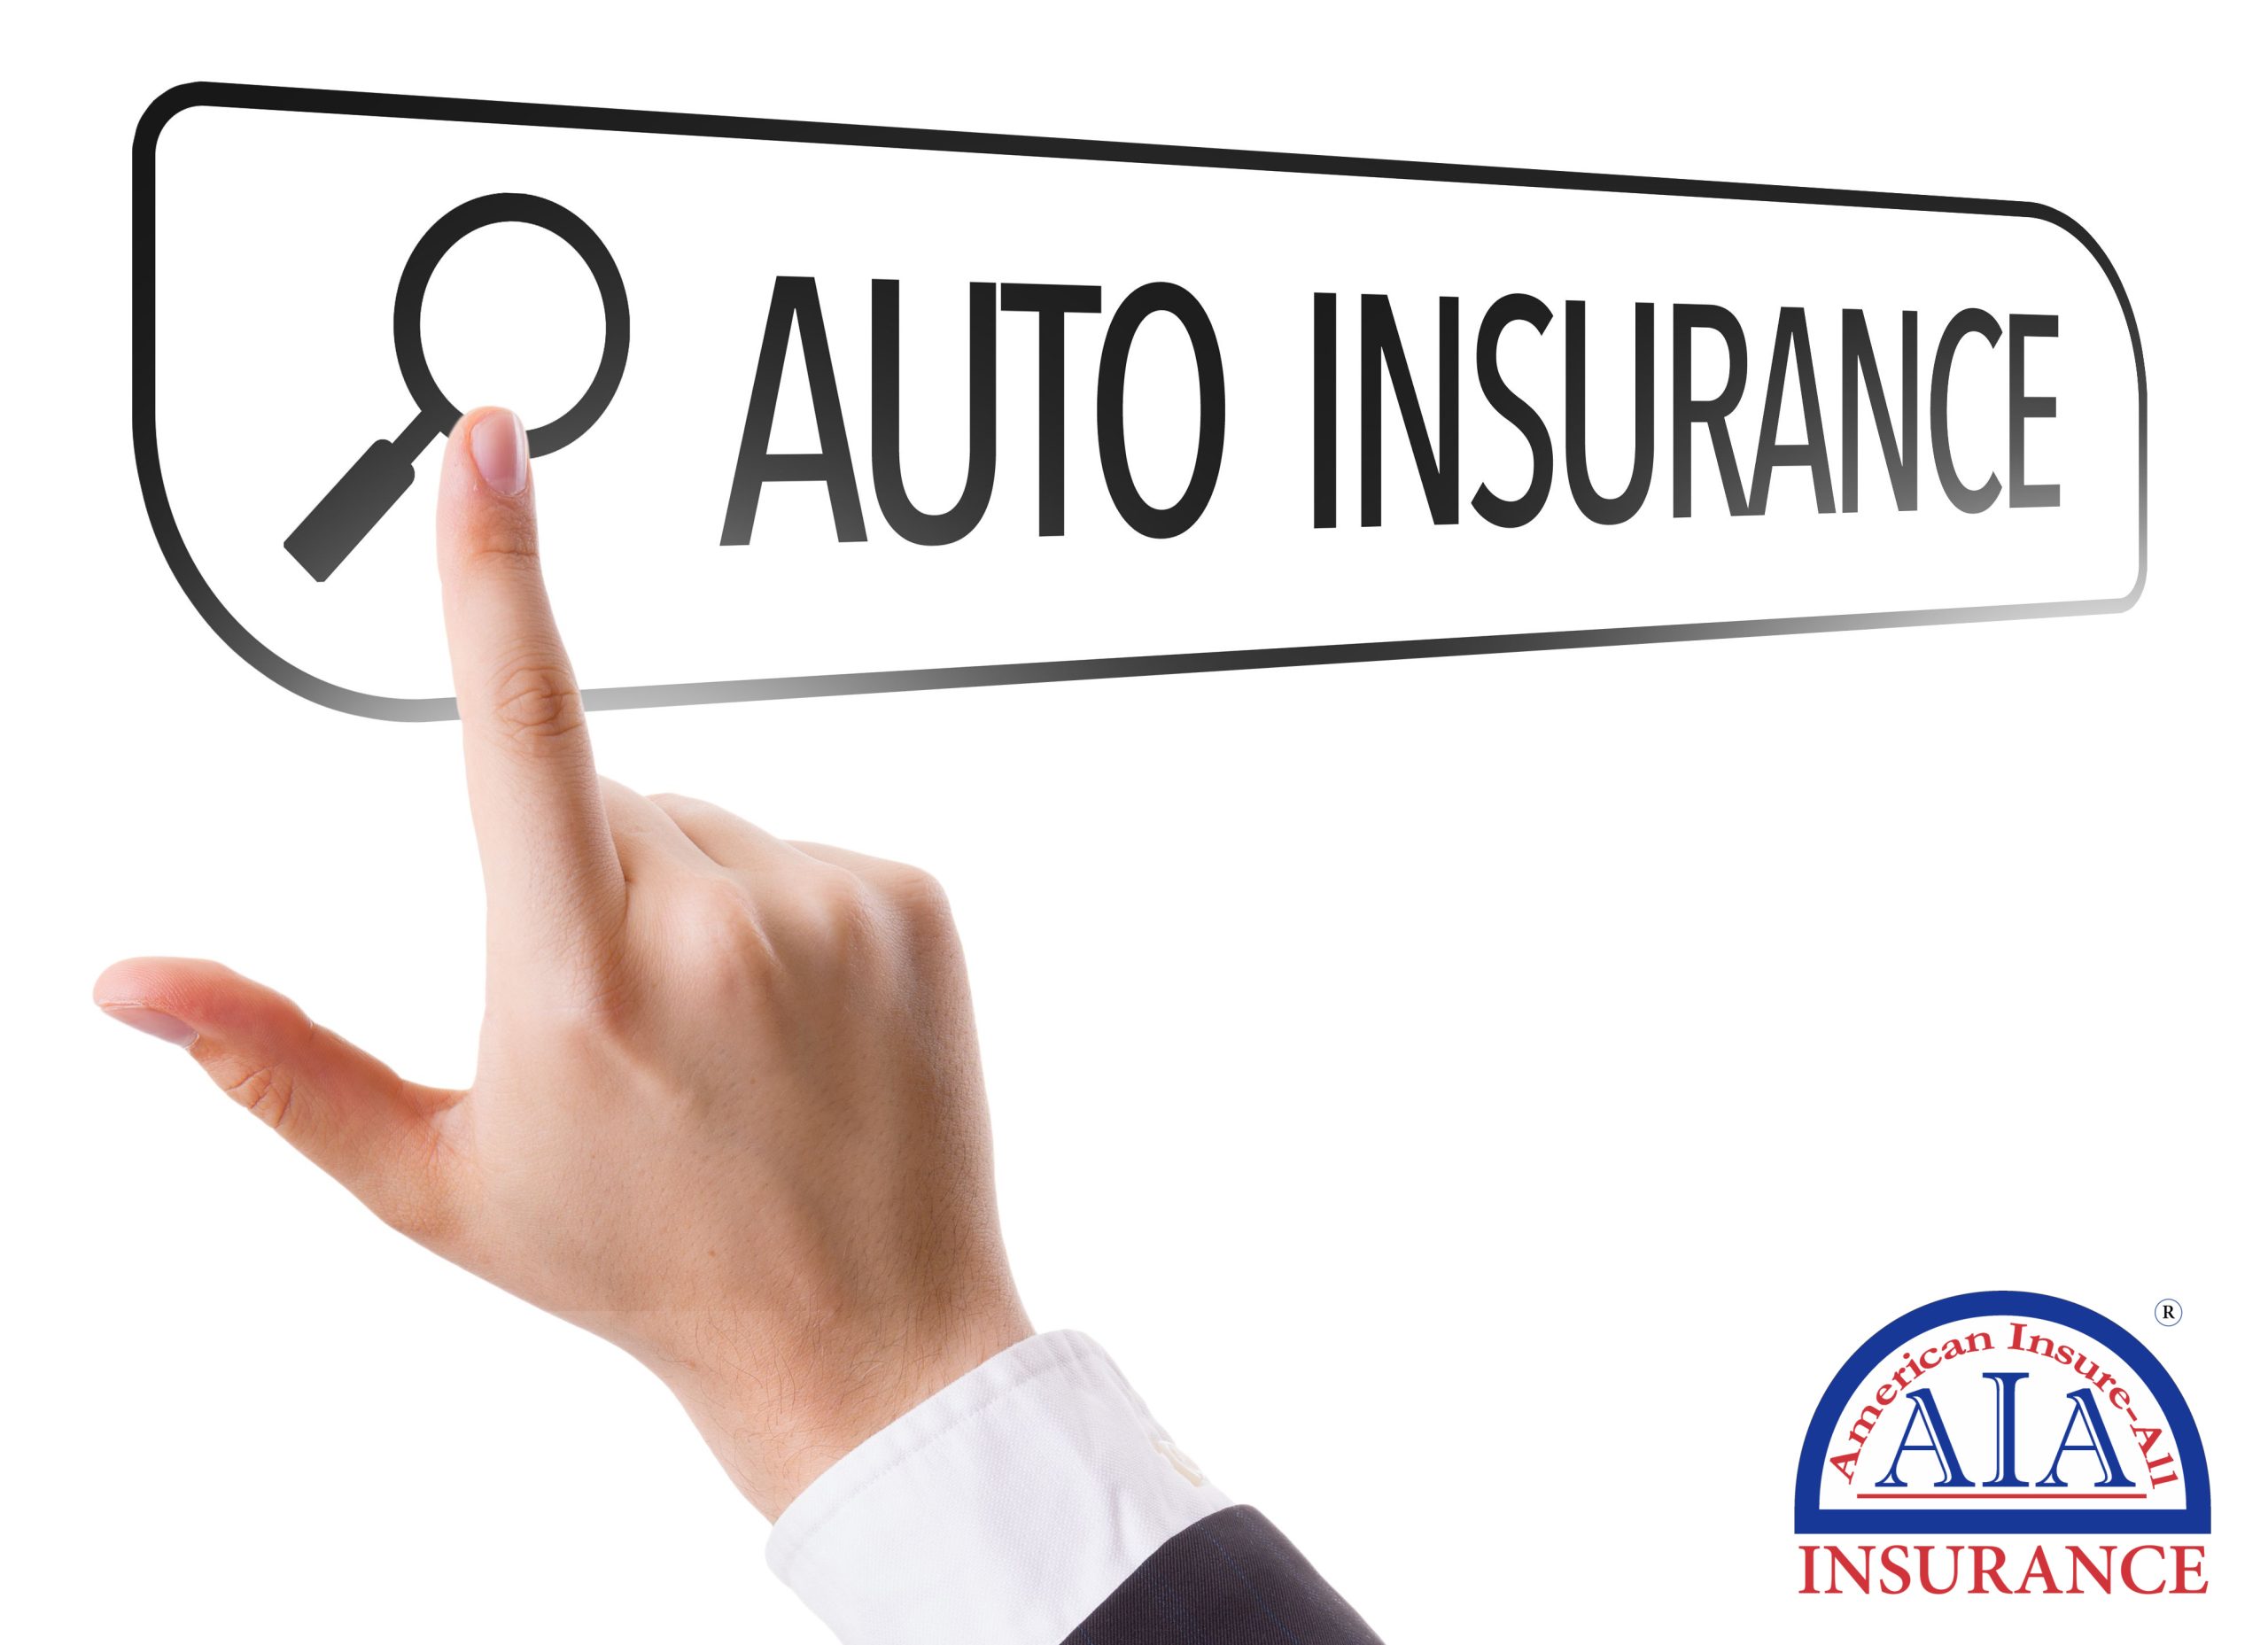 Sift Through Auto Insurance Quotes for Your Business to Find the Right One